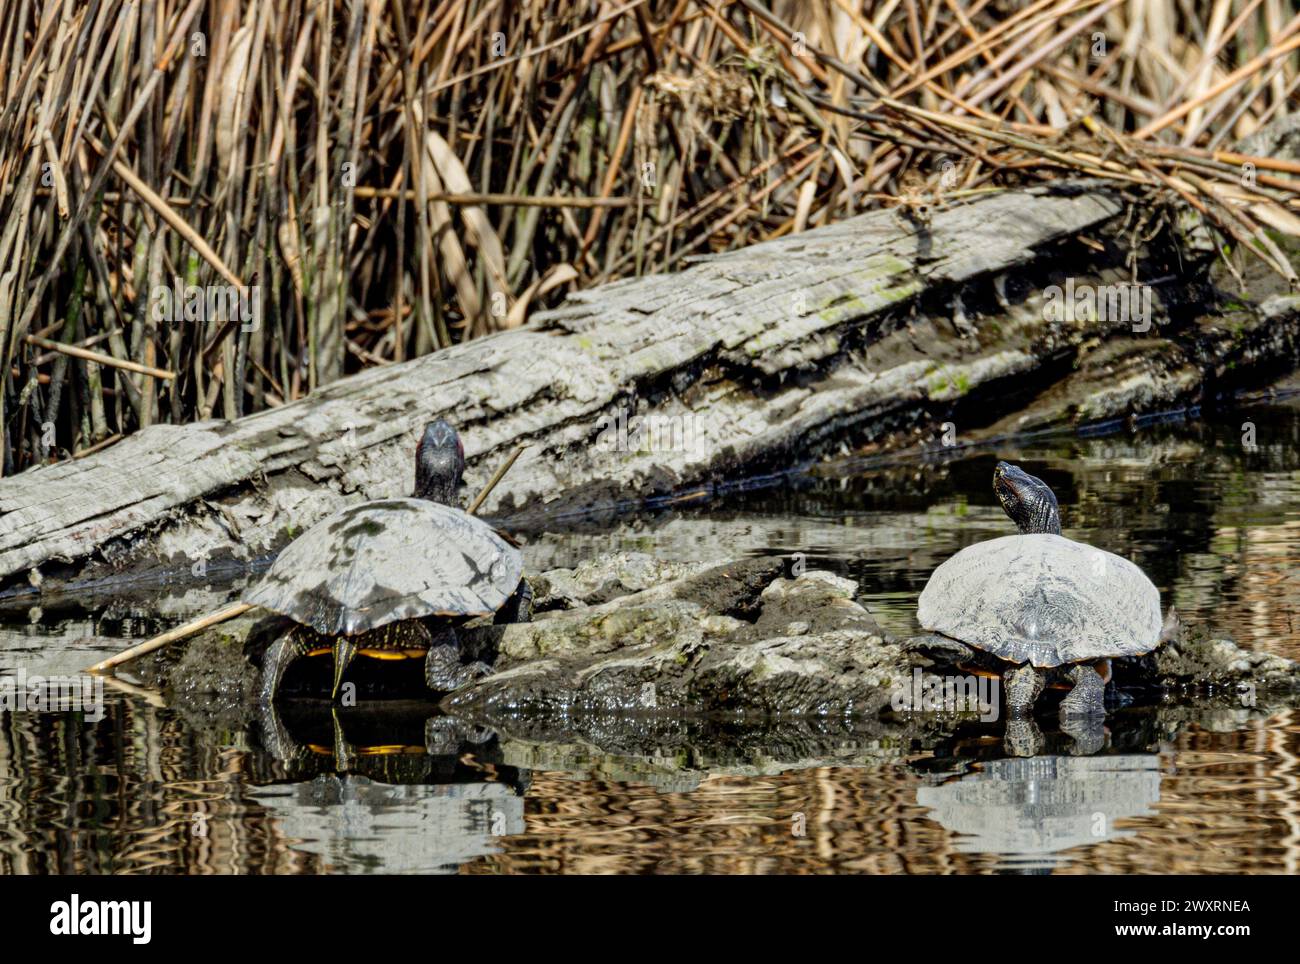 The two turtles basking on a log in the water. Stock Photo